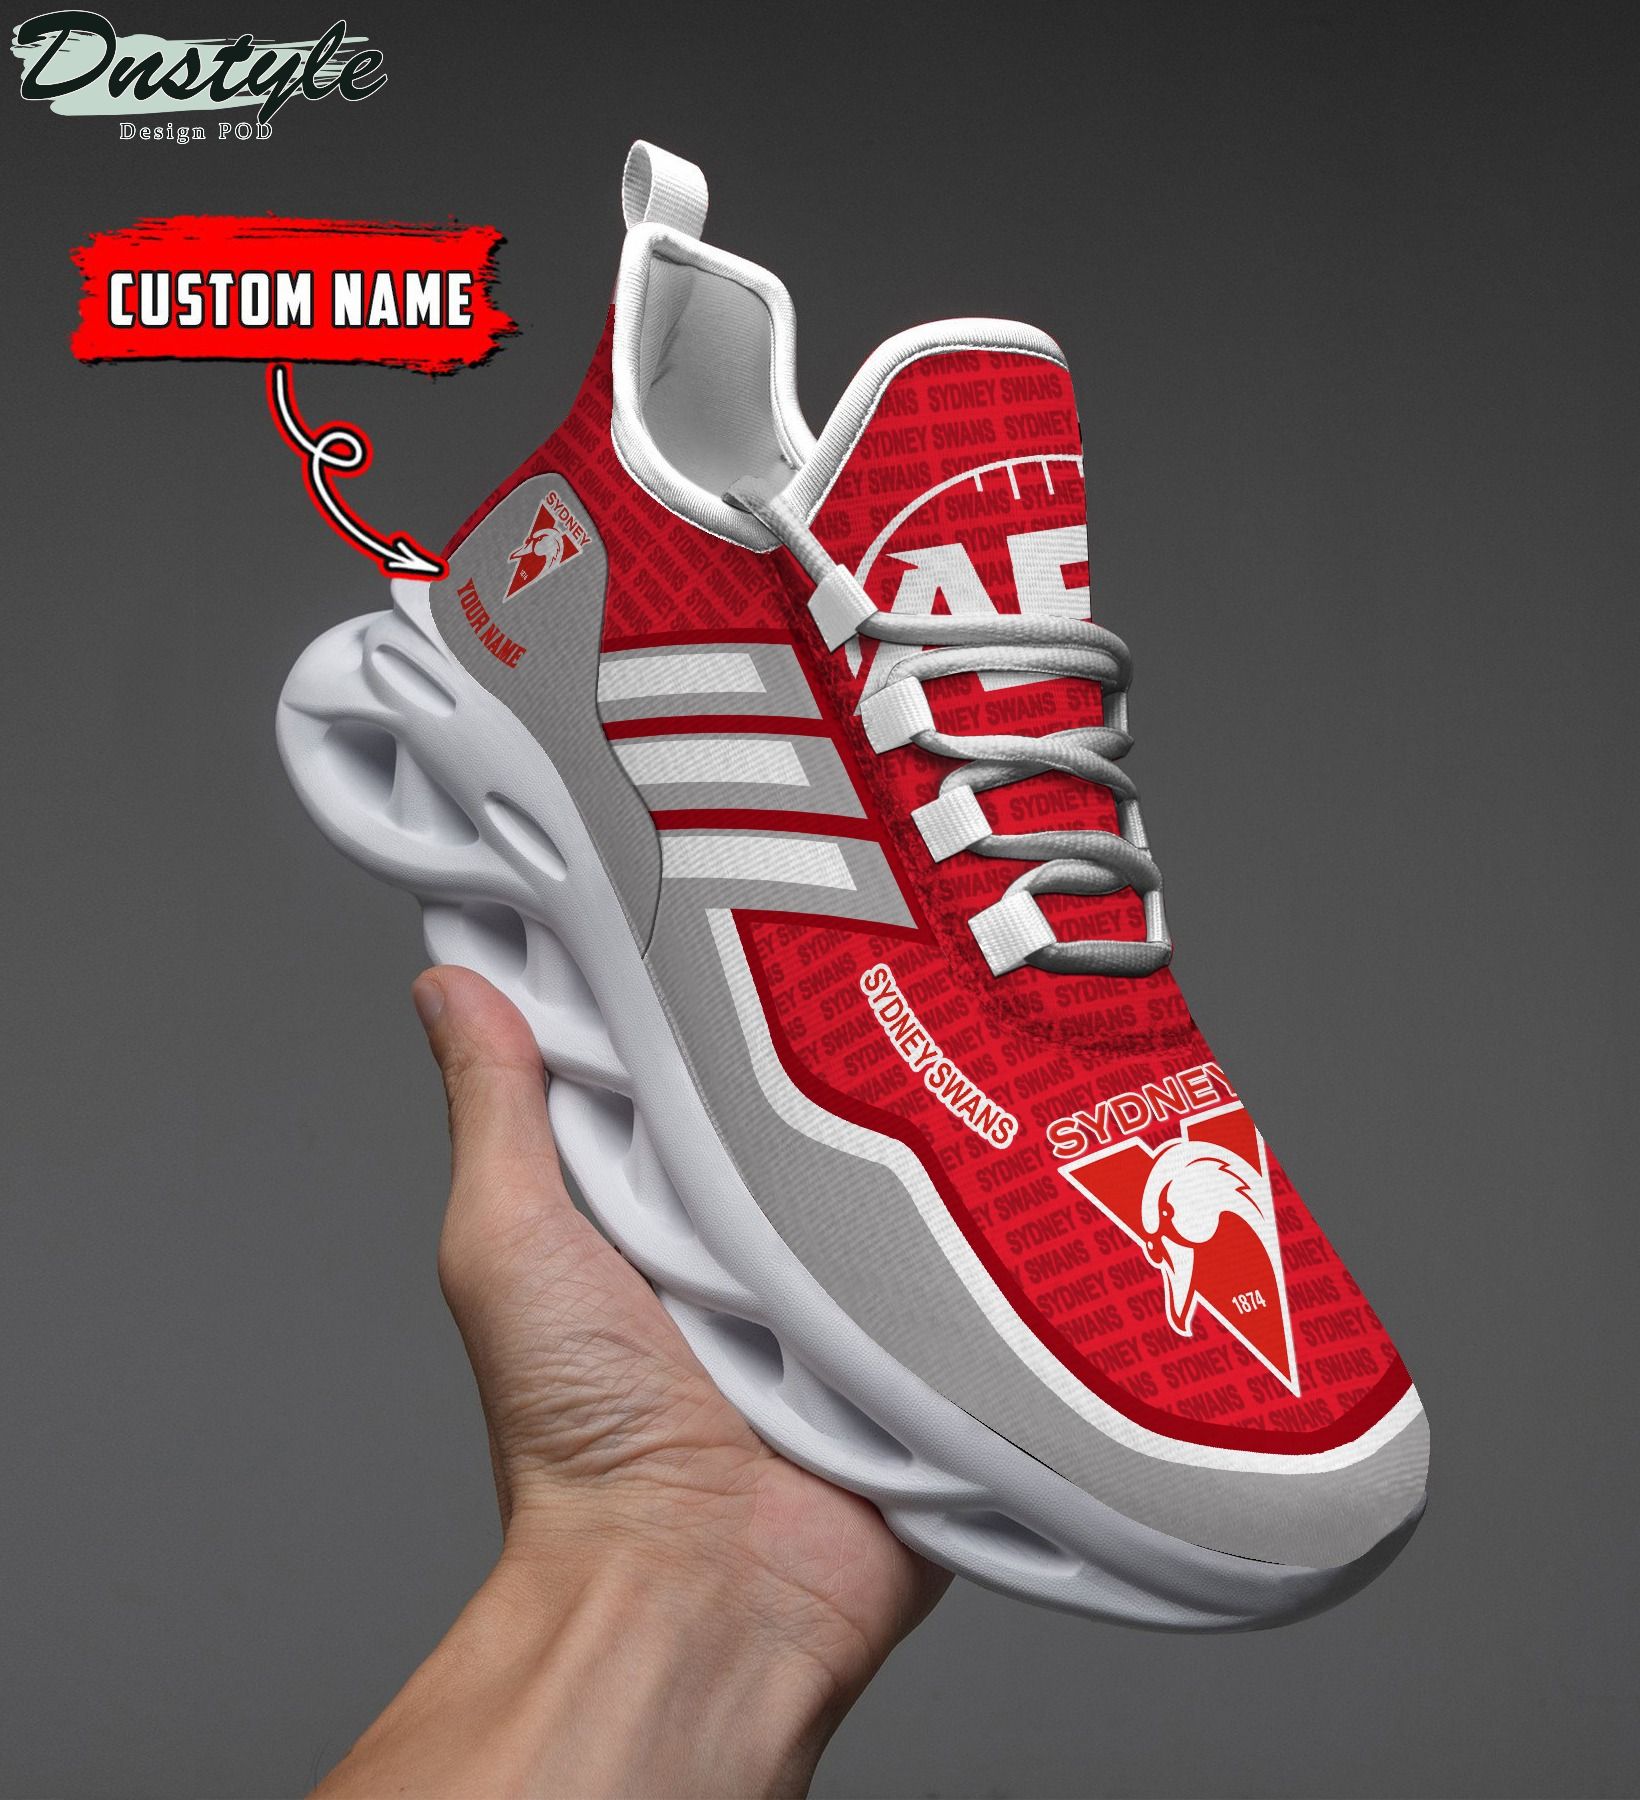 Sydney swans AFL personalized clunky max soul shoes